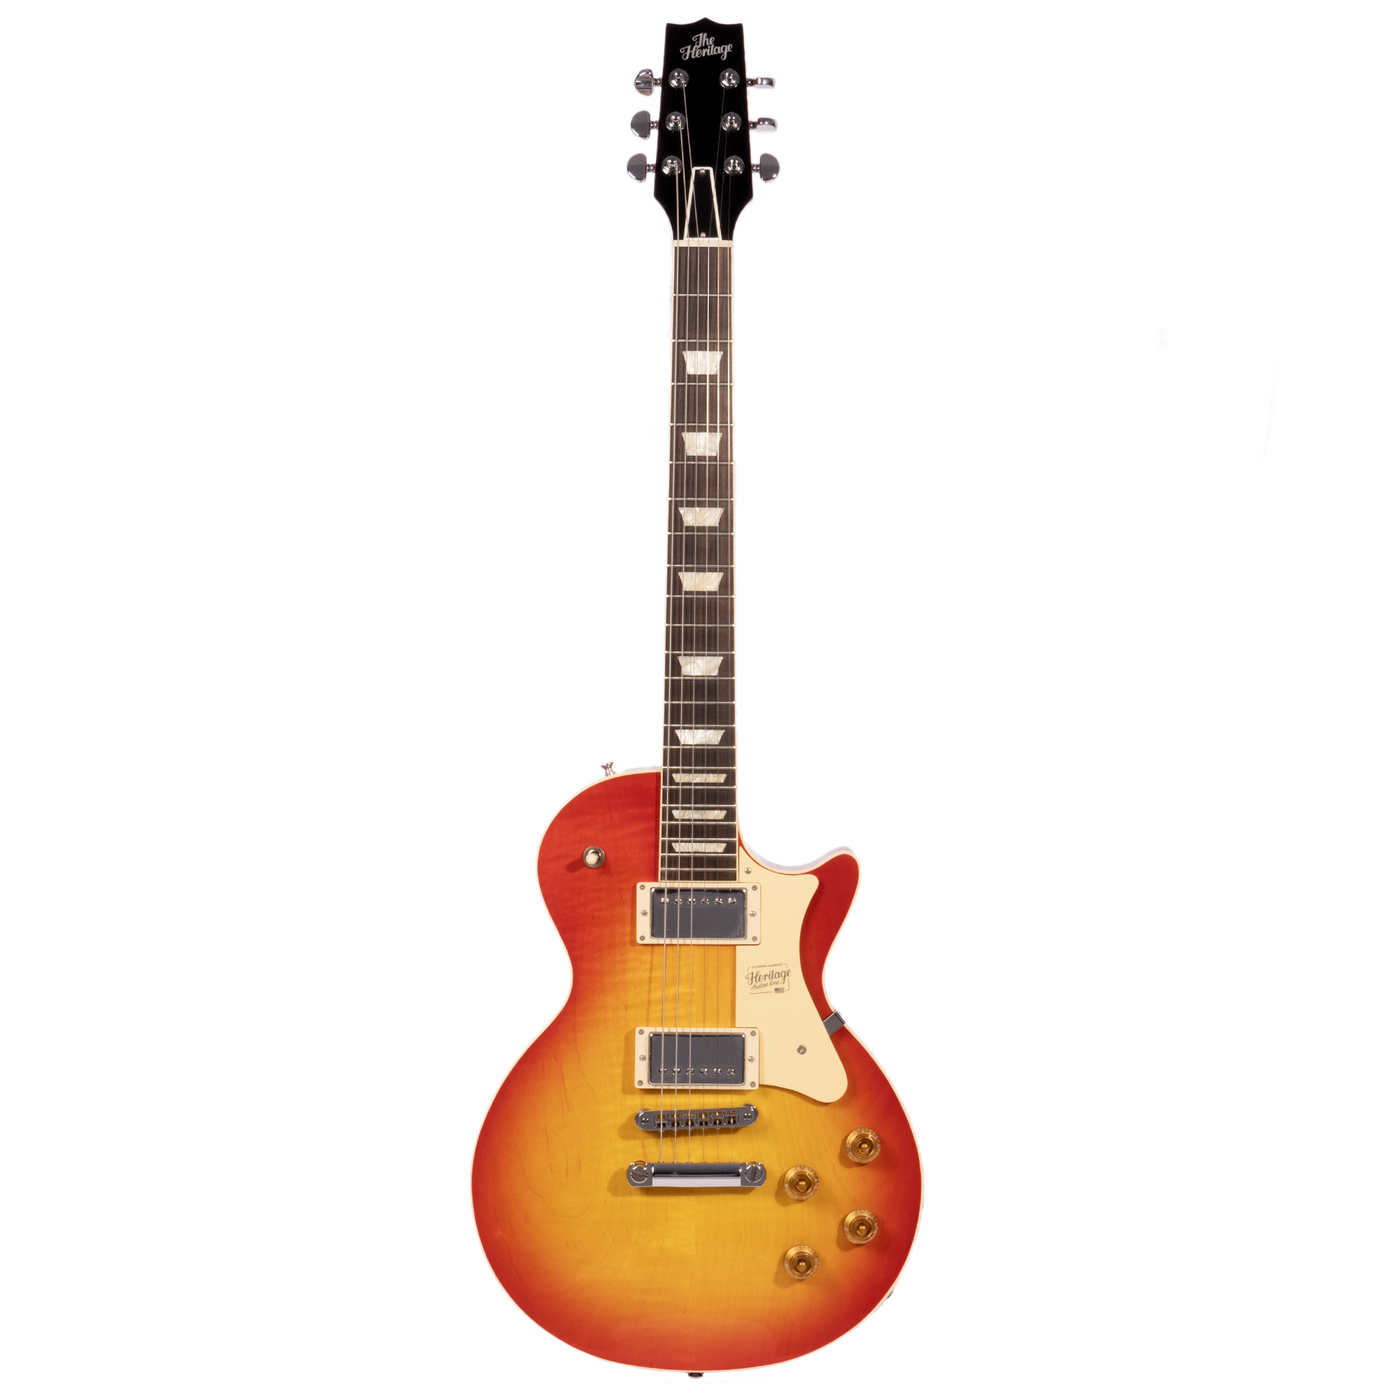 Heritage Standard Collection H-150 Electric Guitar with Case, Vintage Cherry Sunburst